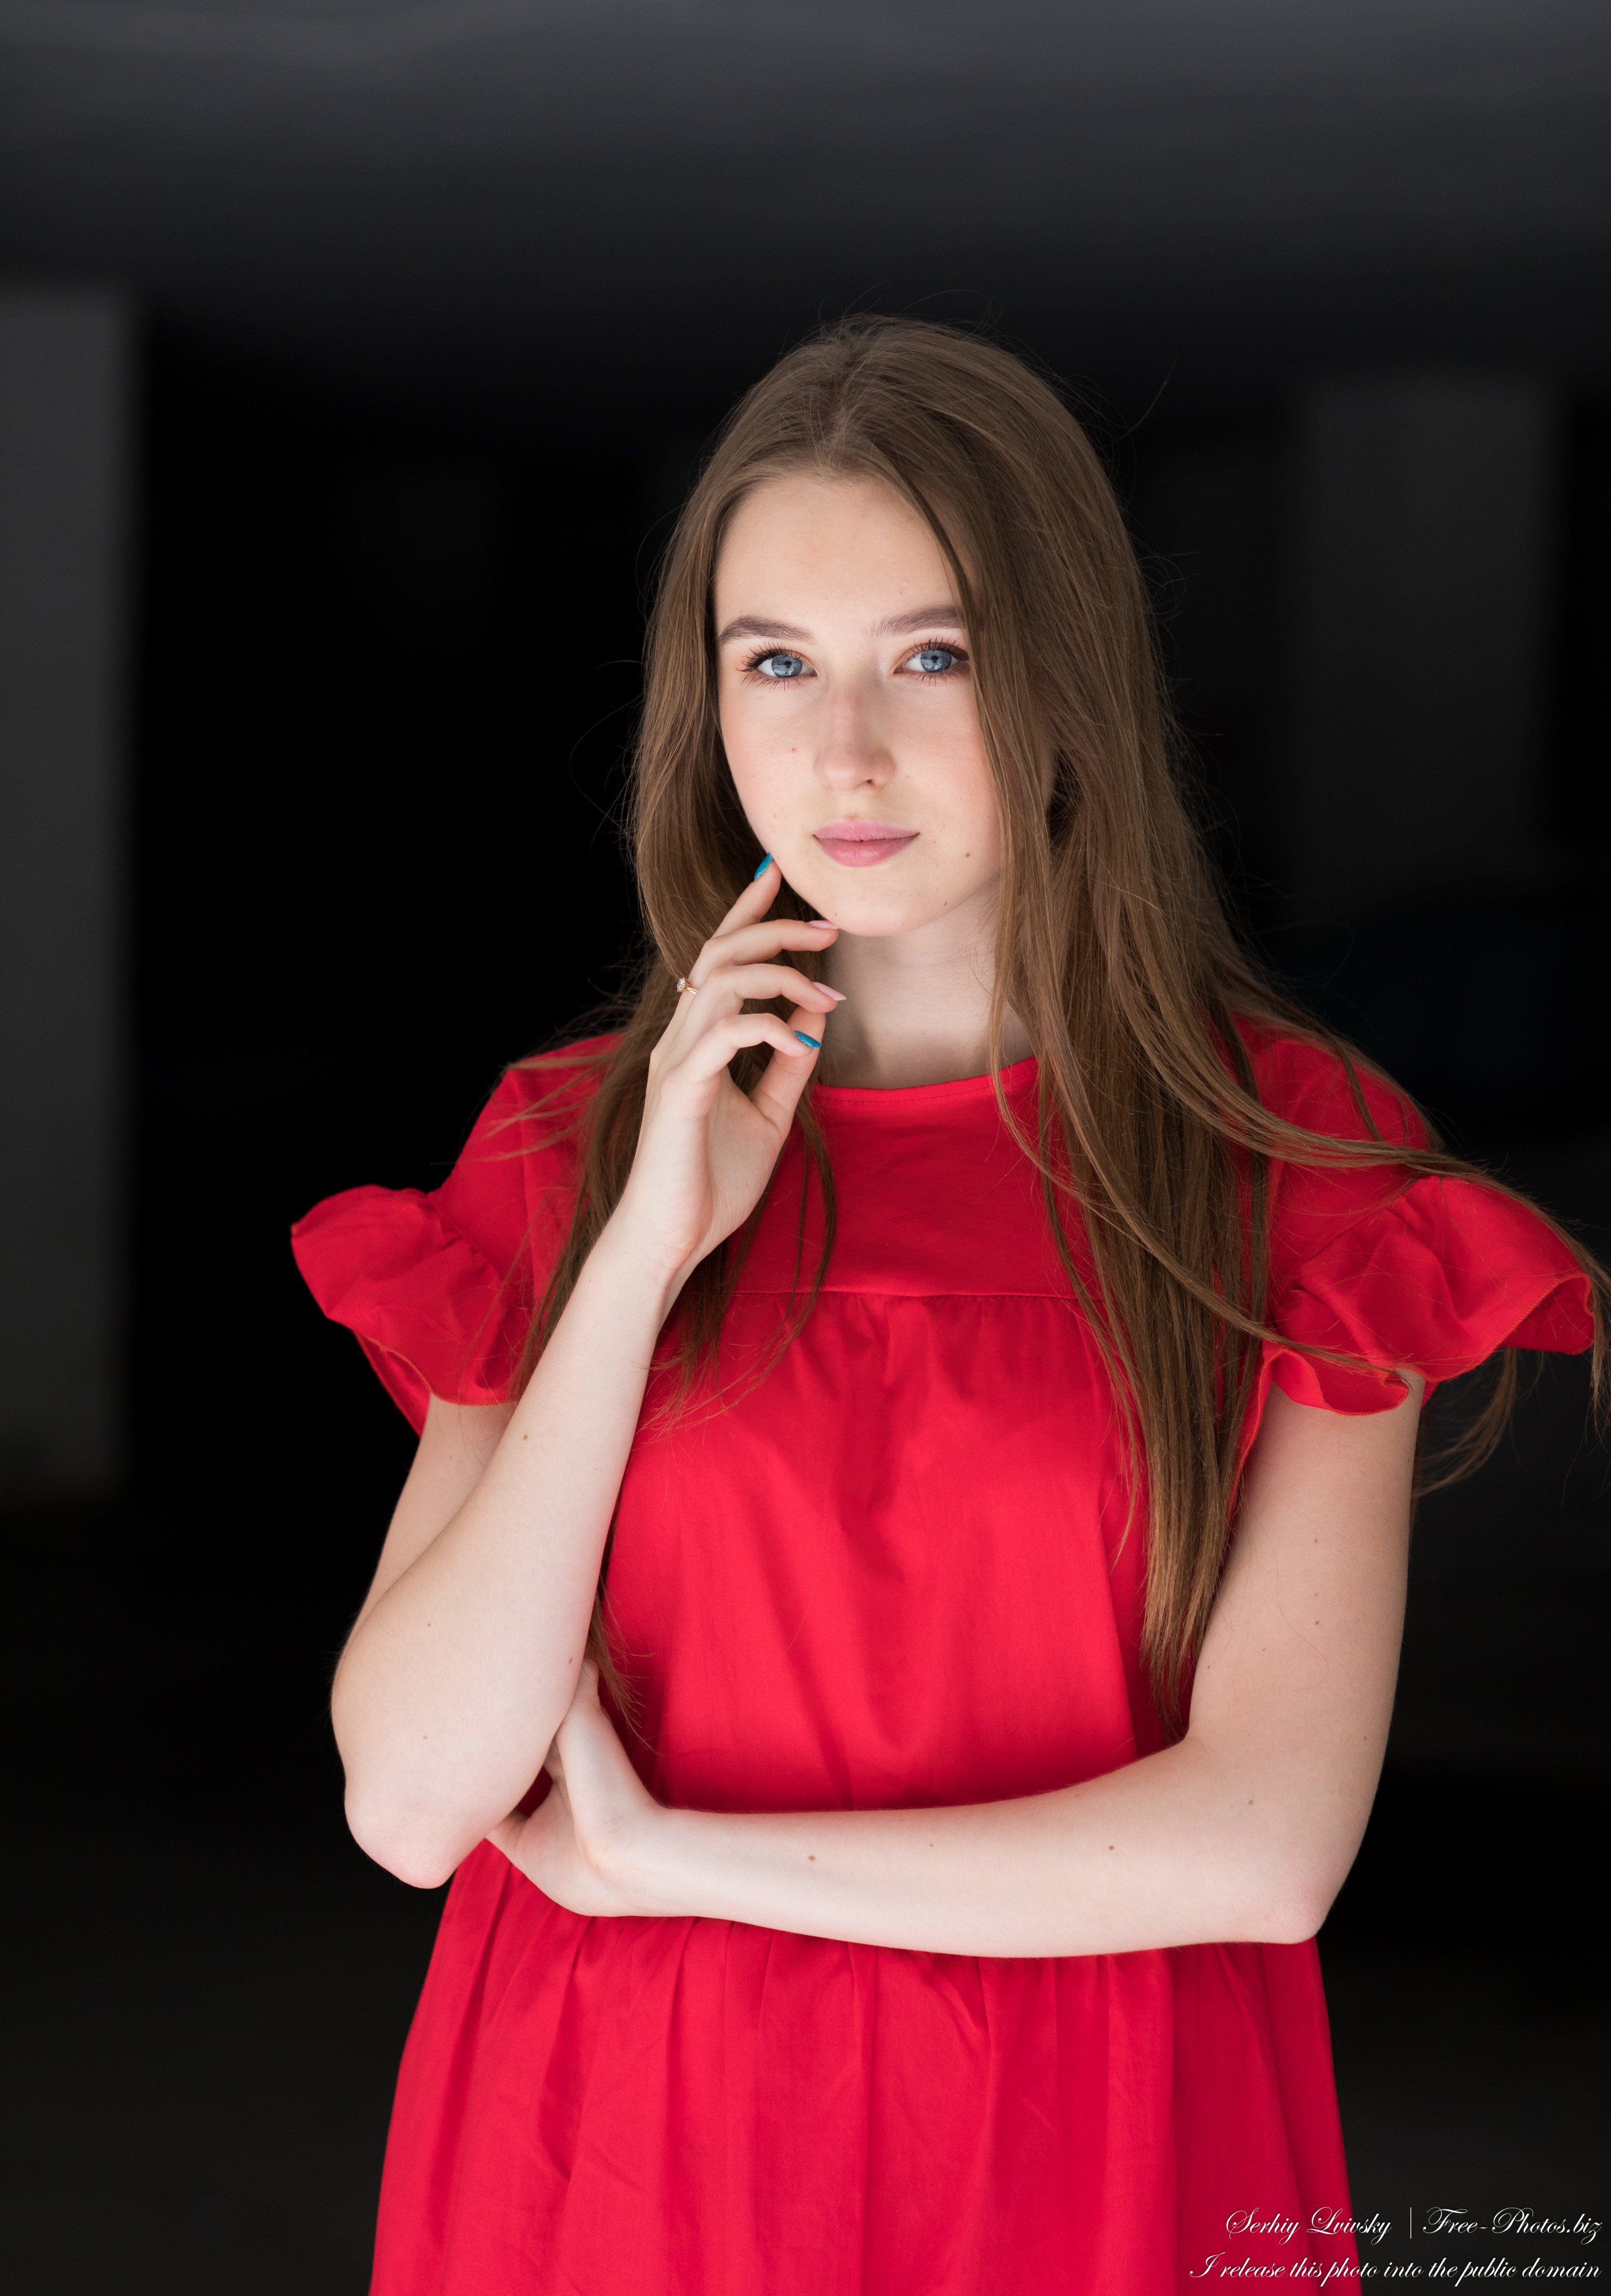 Photo Of Vika An 18 Year Old Girl With Blue Eyes And Natural Fair Hair Photographed By